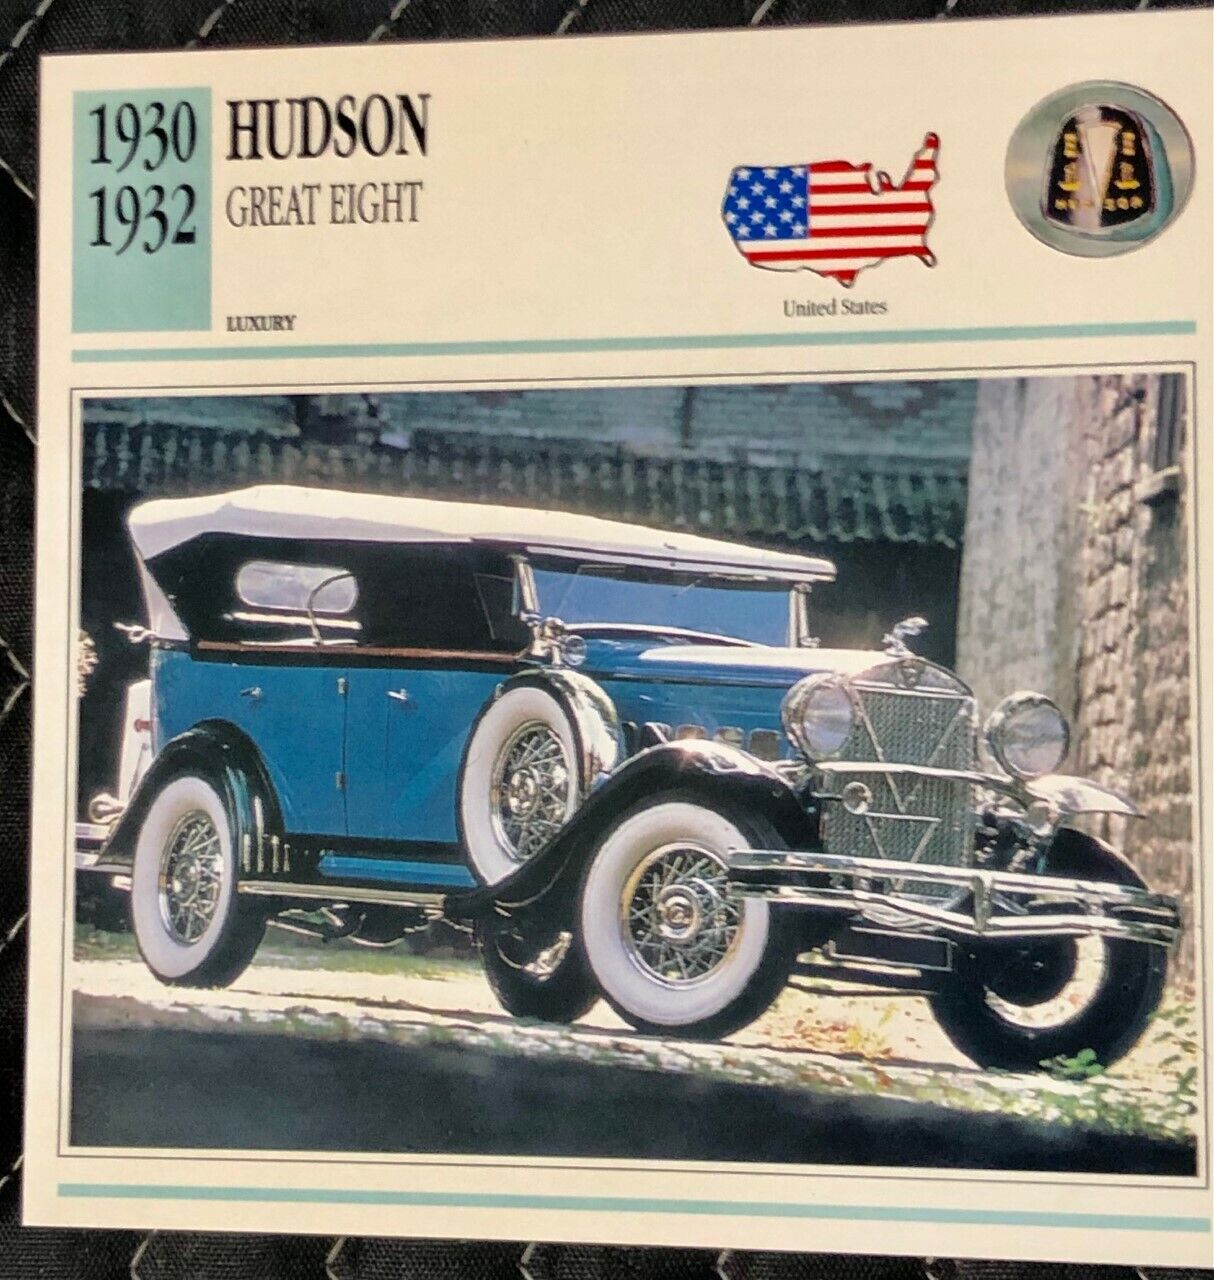 1930 Hudson Great Eight Picture Card, Specifications on back 8 Cylinder Phaeton 